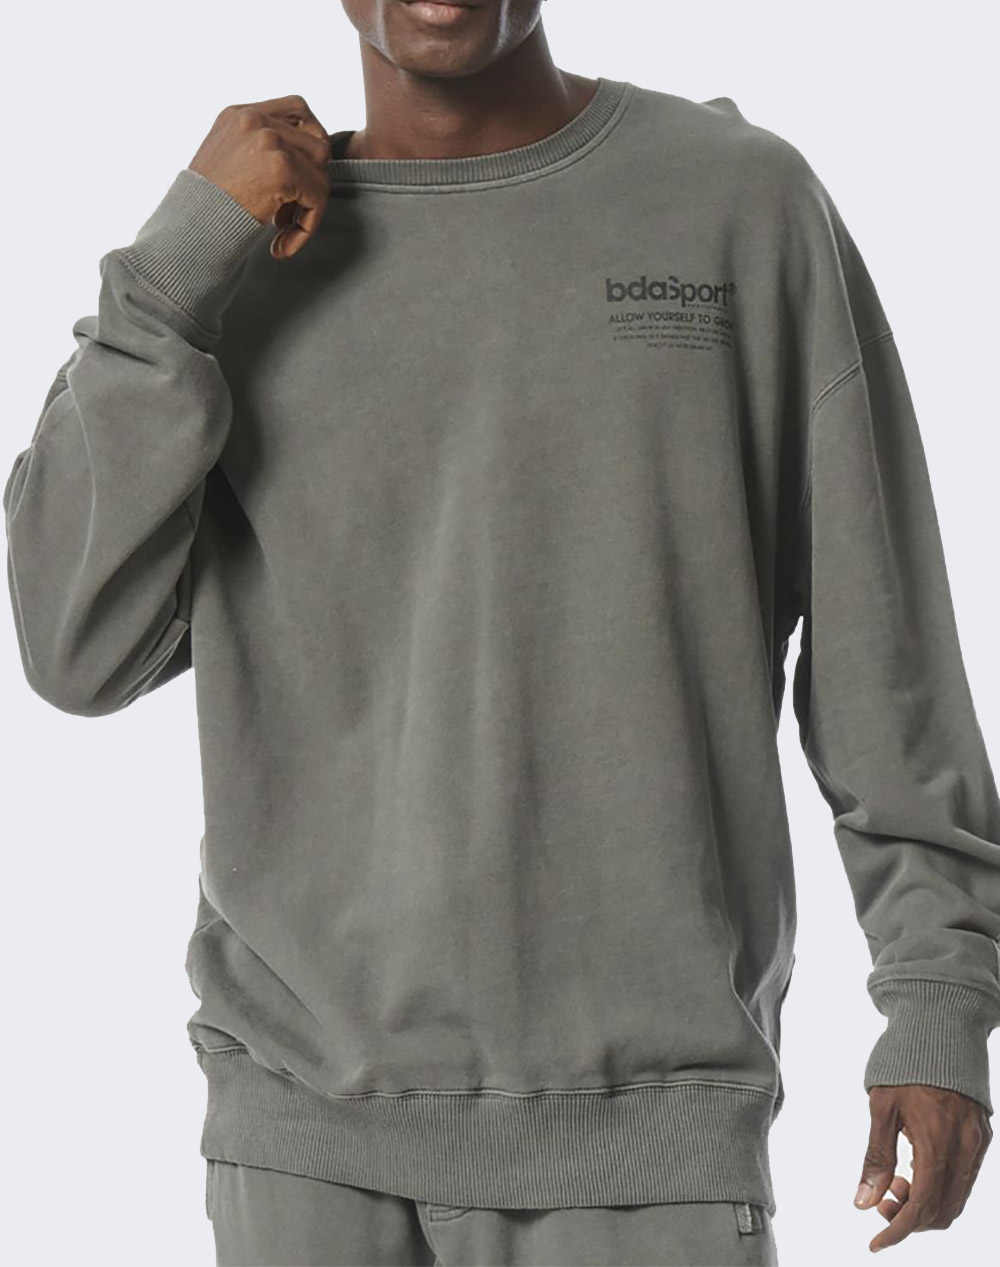 BODY ACTION GENDER NEUTRAL OVER-DYED CREWNECK SWEATER 063317-01-Granite Grey Gray